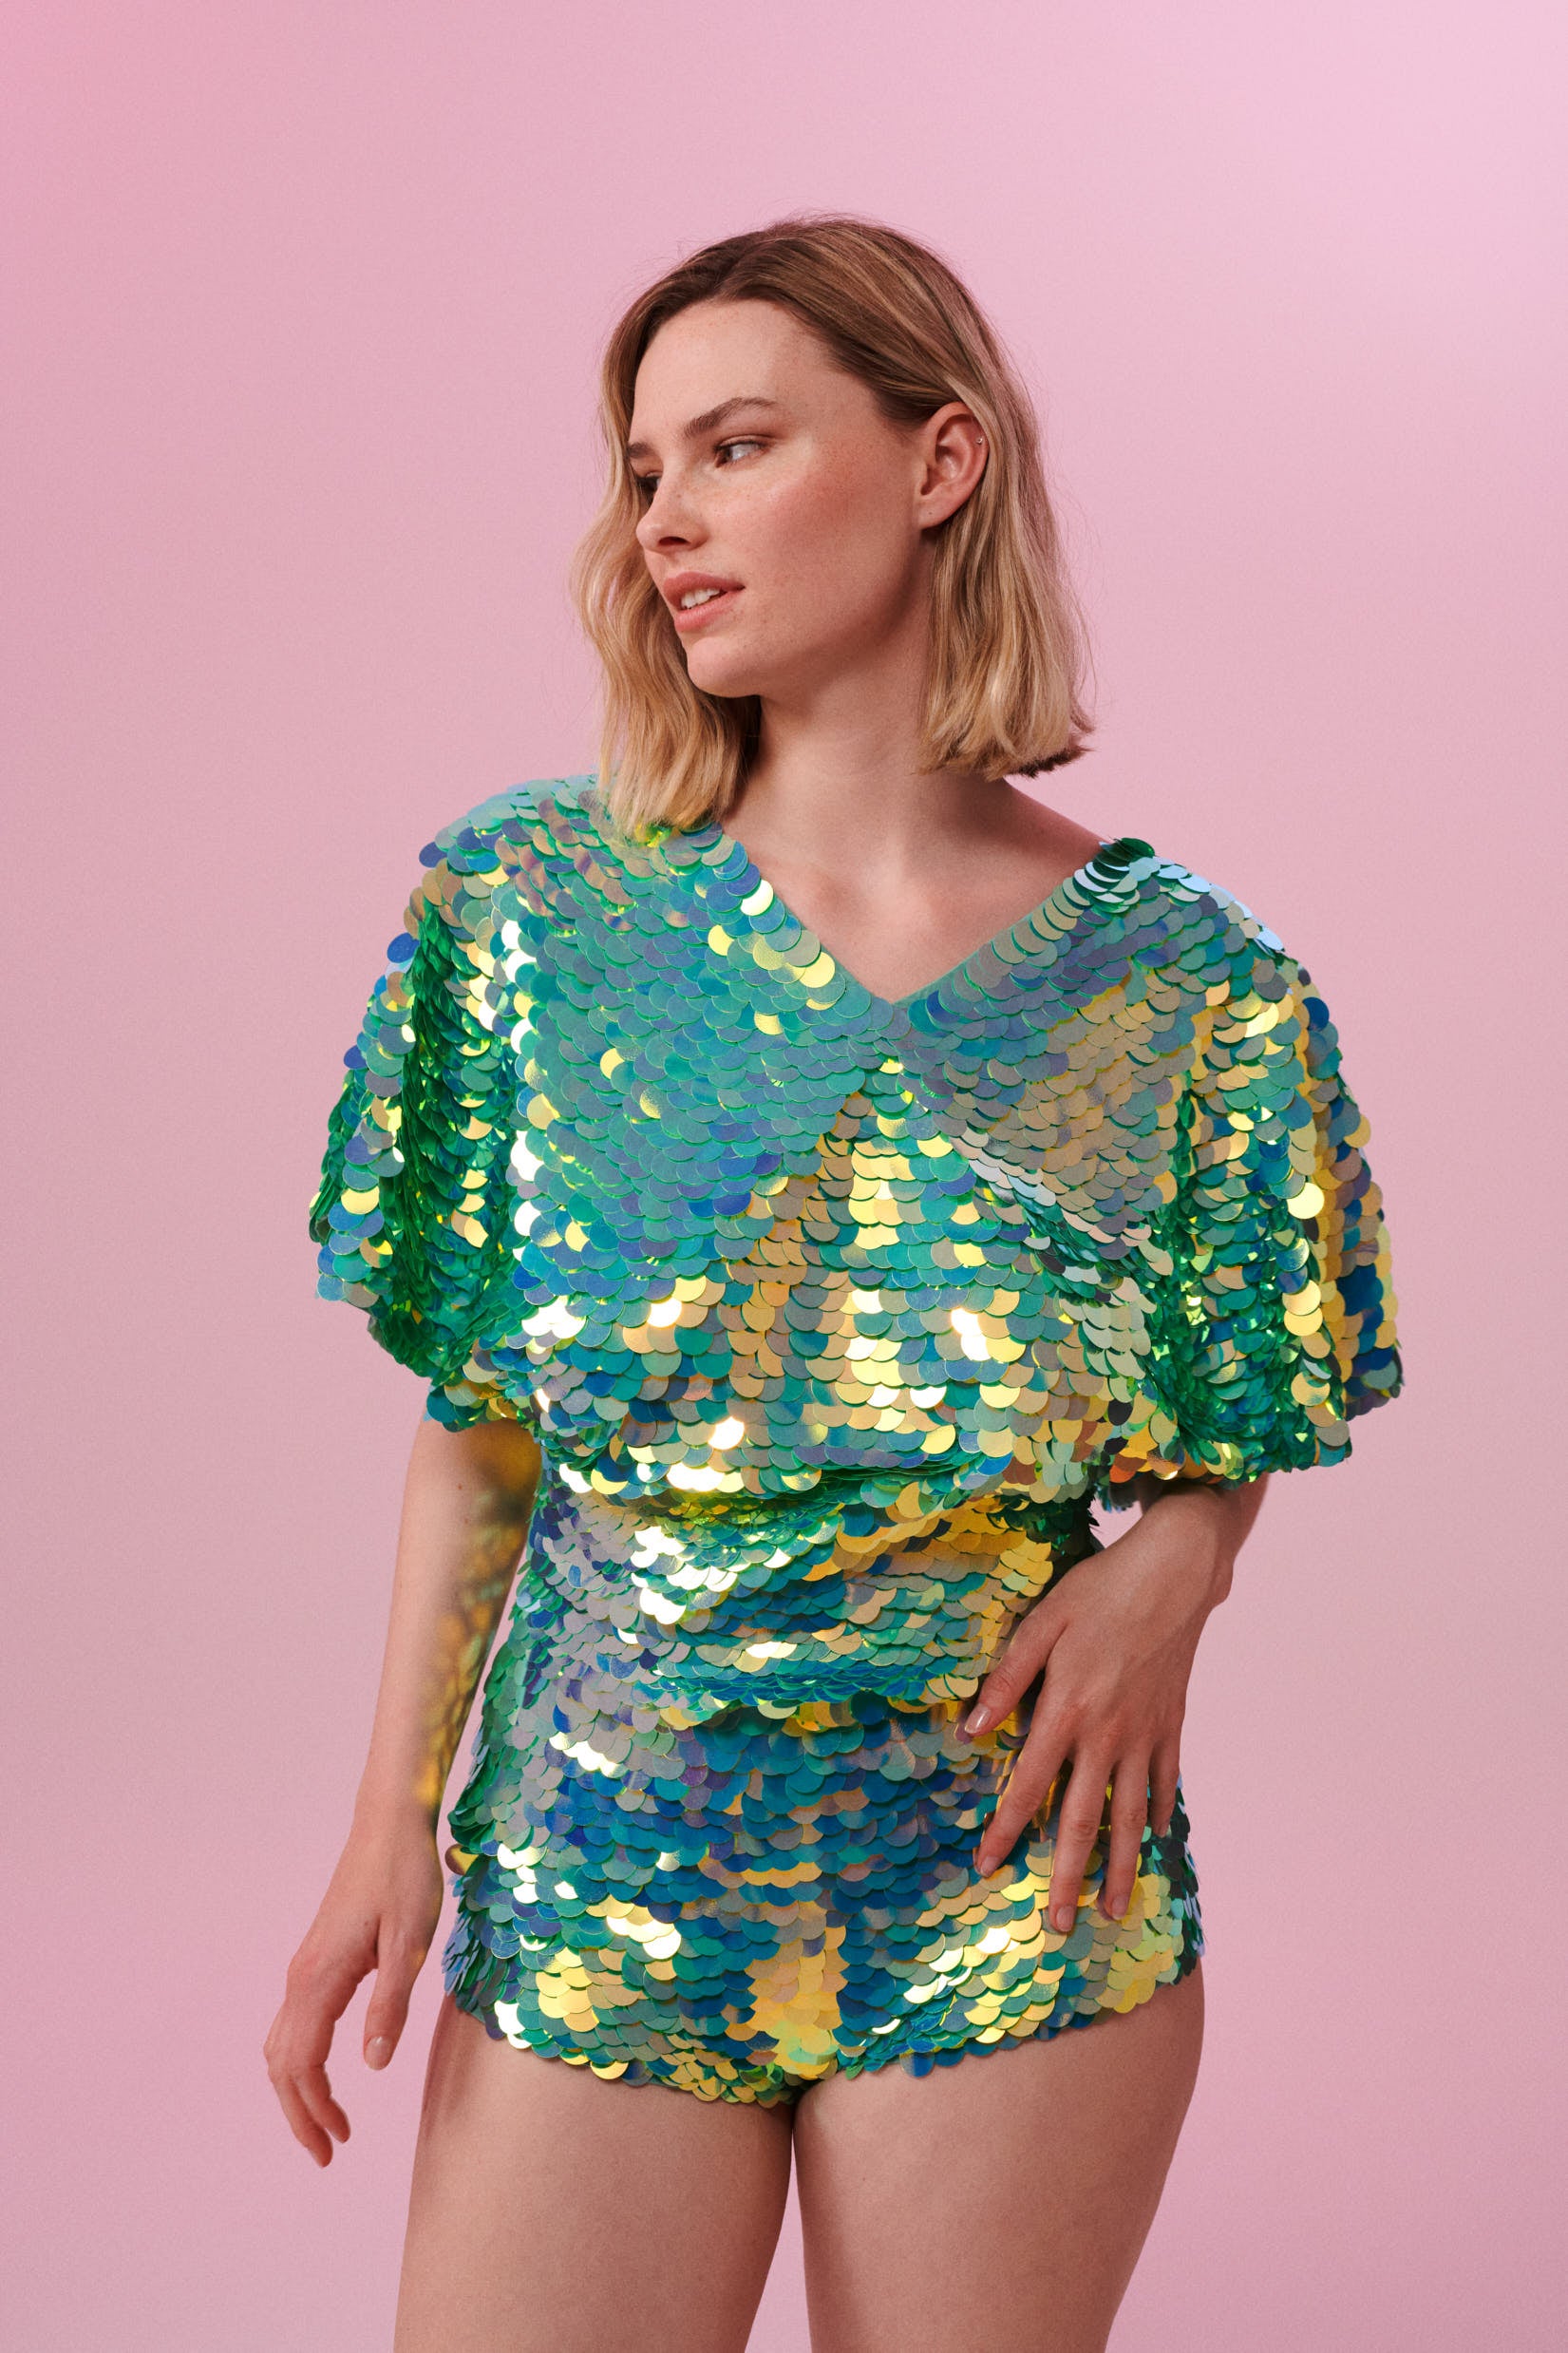 A woman with short blonde hair, wearing high waisted  festival sequin hot pants shorts and a sequin cape completely covered in large round holographic Rosa Bloom sequins. The Chameleon sequins glisten in the light, creating a mix of shimmering colours of sage green, lilac and mint. 